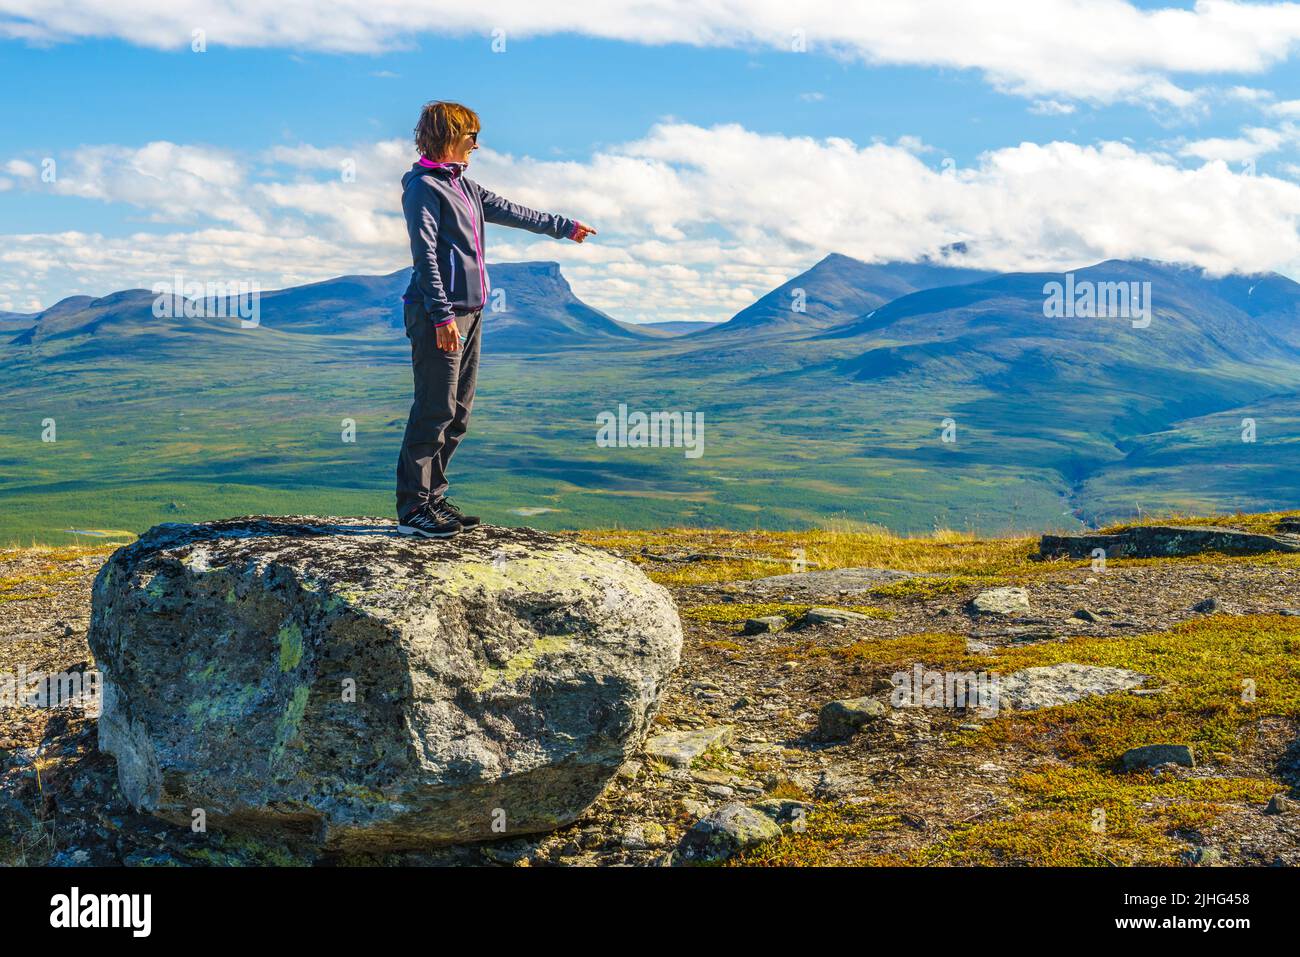 Woman standing on a rock on Mount Nuolja with Lapporten, Tjuonavagge in background, pointing at Lapporten, Abisko, Swedish Lapland, Sweden Stock Photo